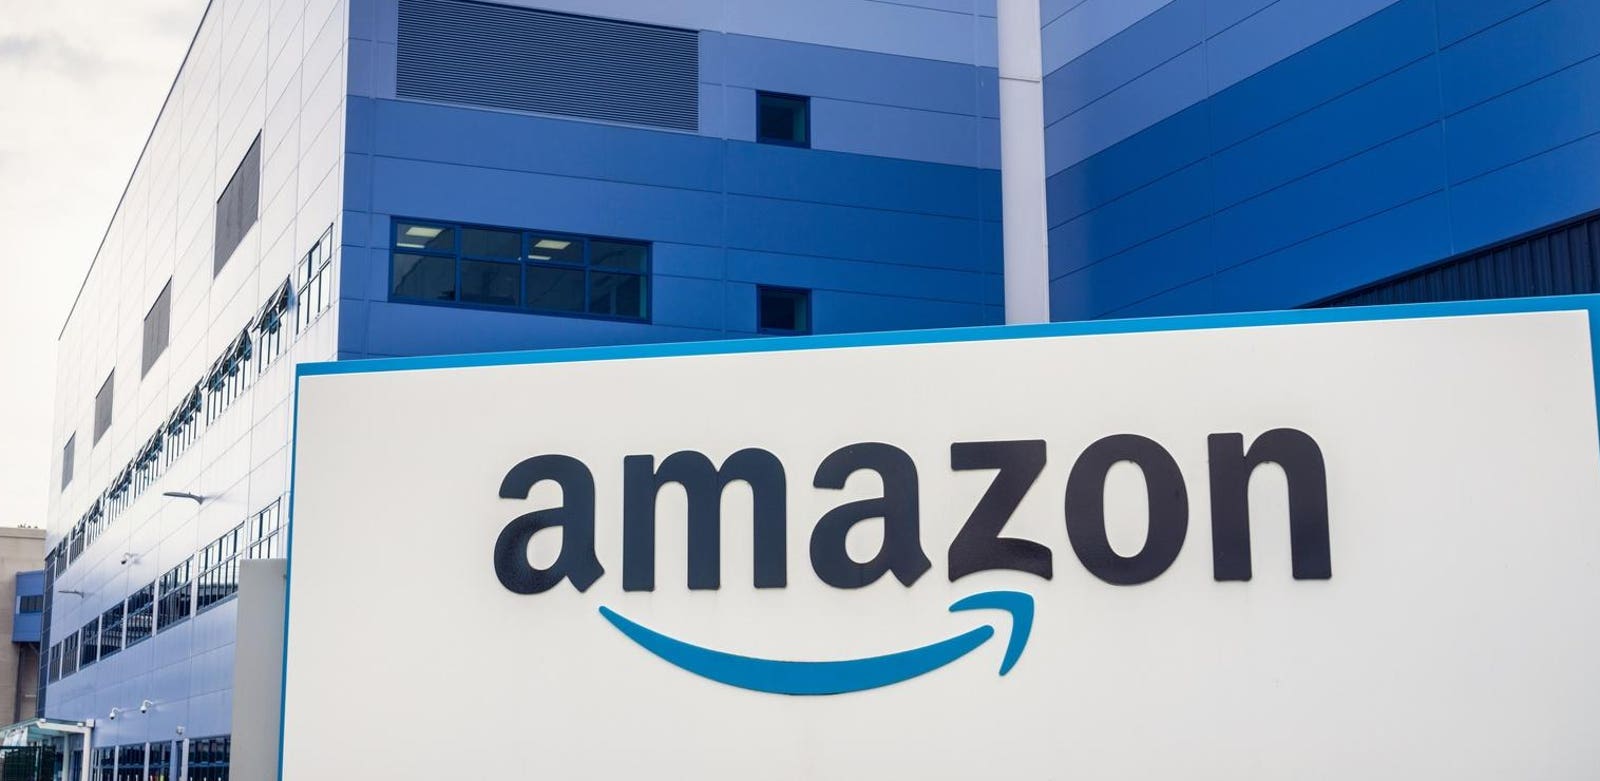 Amazon Health Announces $49 Telehealth Service, Consolidating Clinic Into One Medical